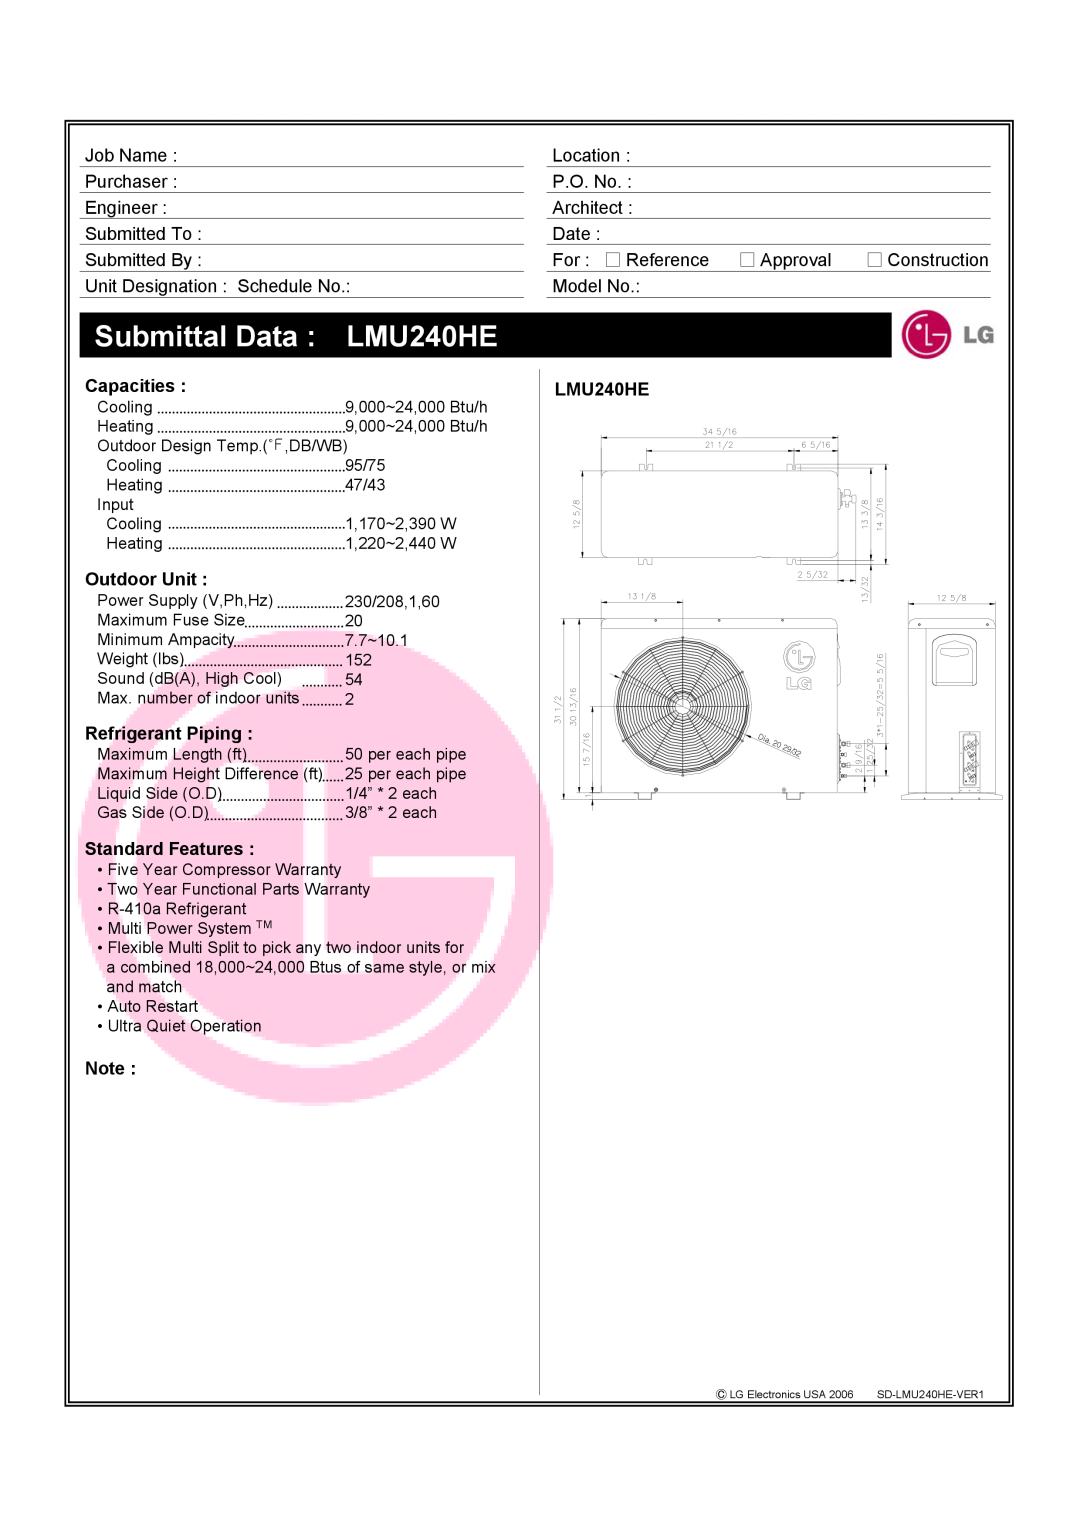 LG Electronics warranty Submittal Data LMU240HE, Job Name Purchaser Engineer Submitted To, For Reference, Approval 